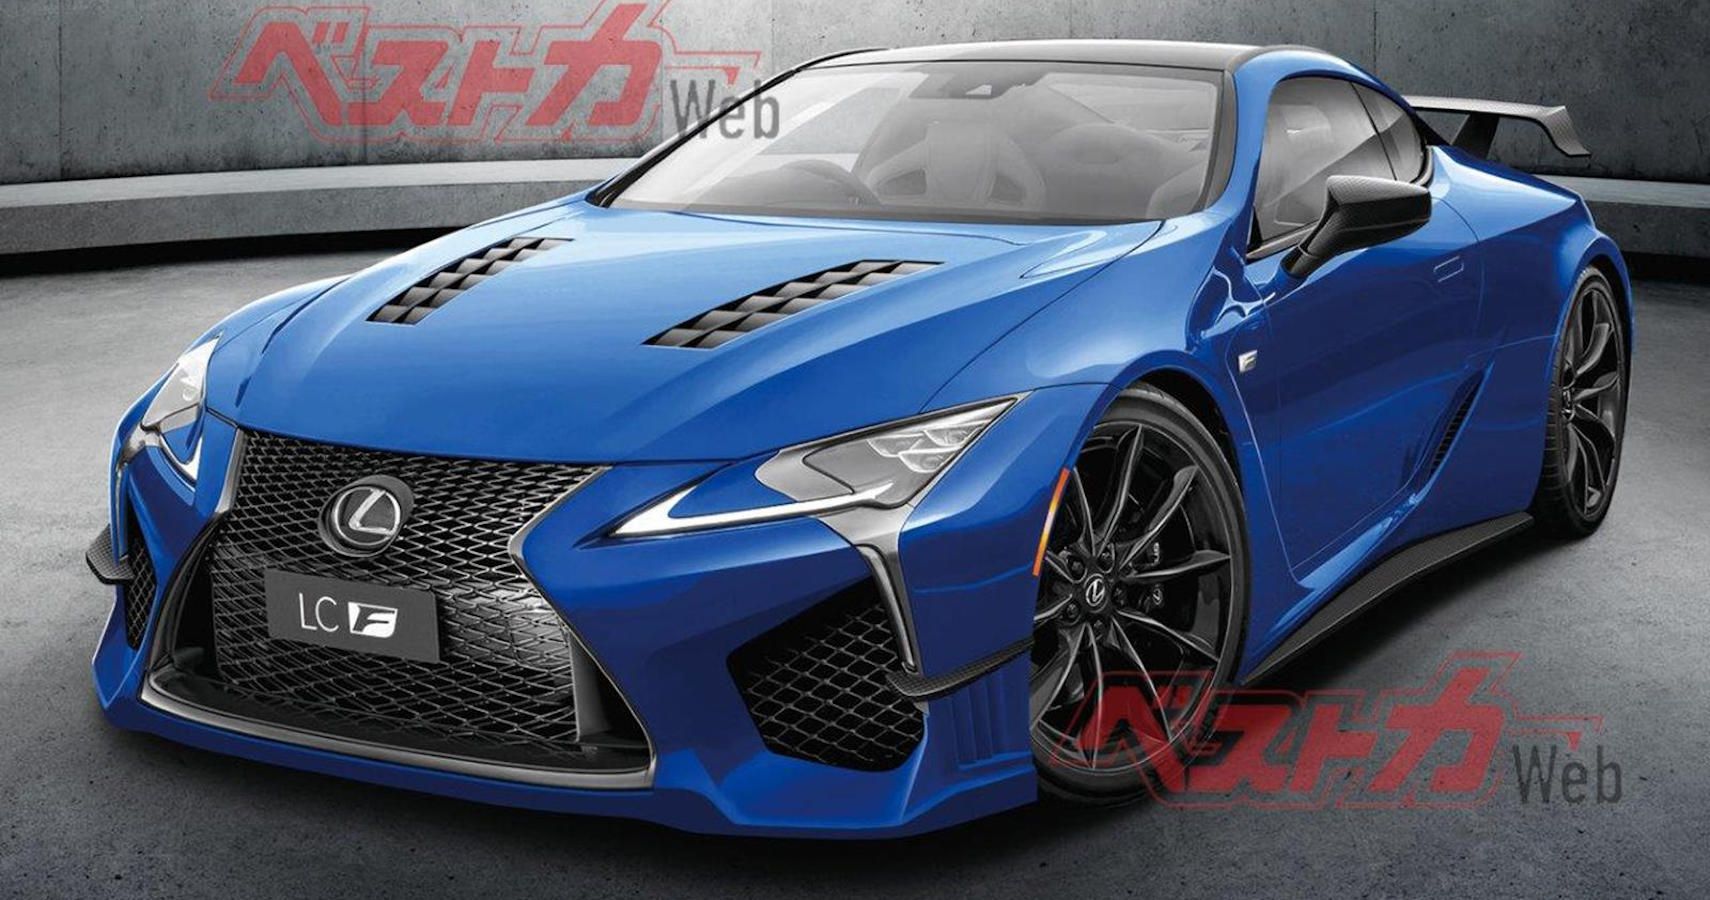 Lexus F Vehicles 22 Ls F And Lc F Reportedly On The Way With Twin Turbo V8